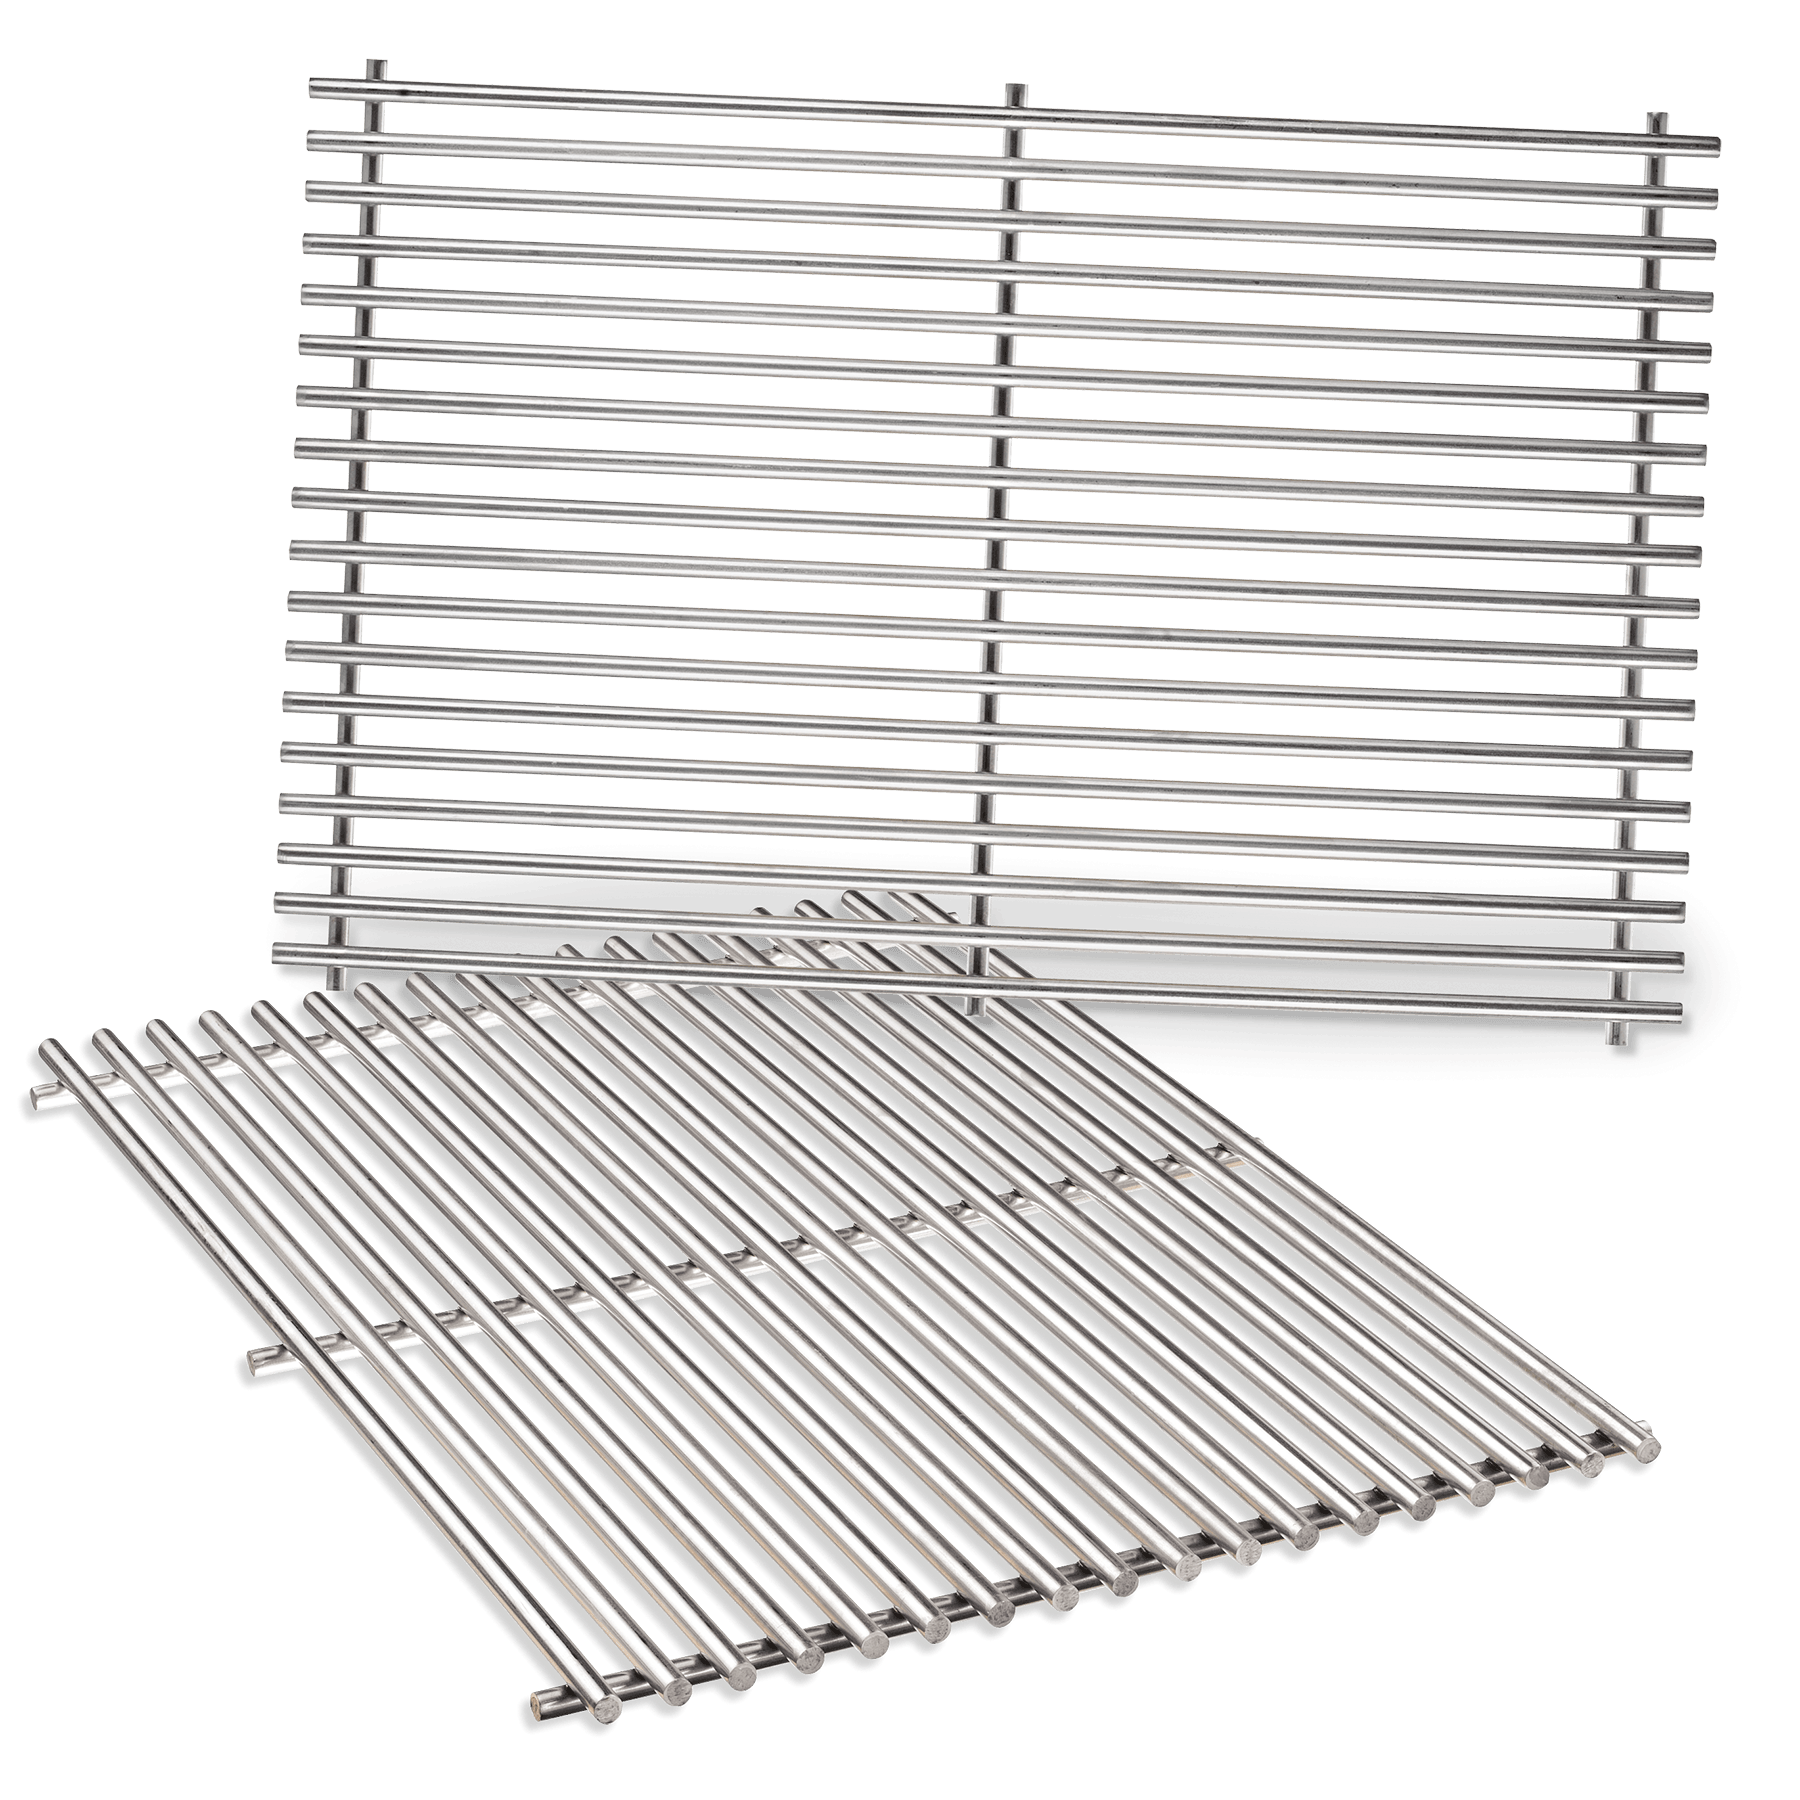 Onlyfire Stainless Steel Cladding Cooking Grill Grid Grates fits Weber 7528 